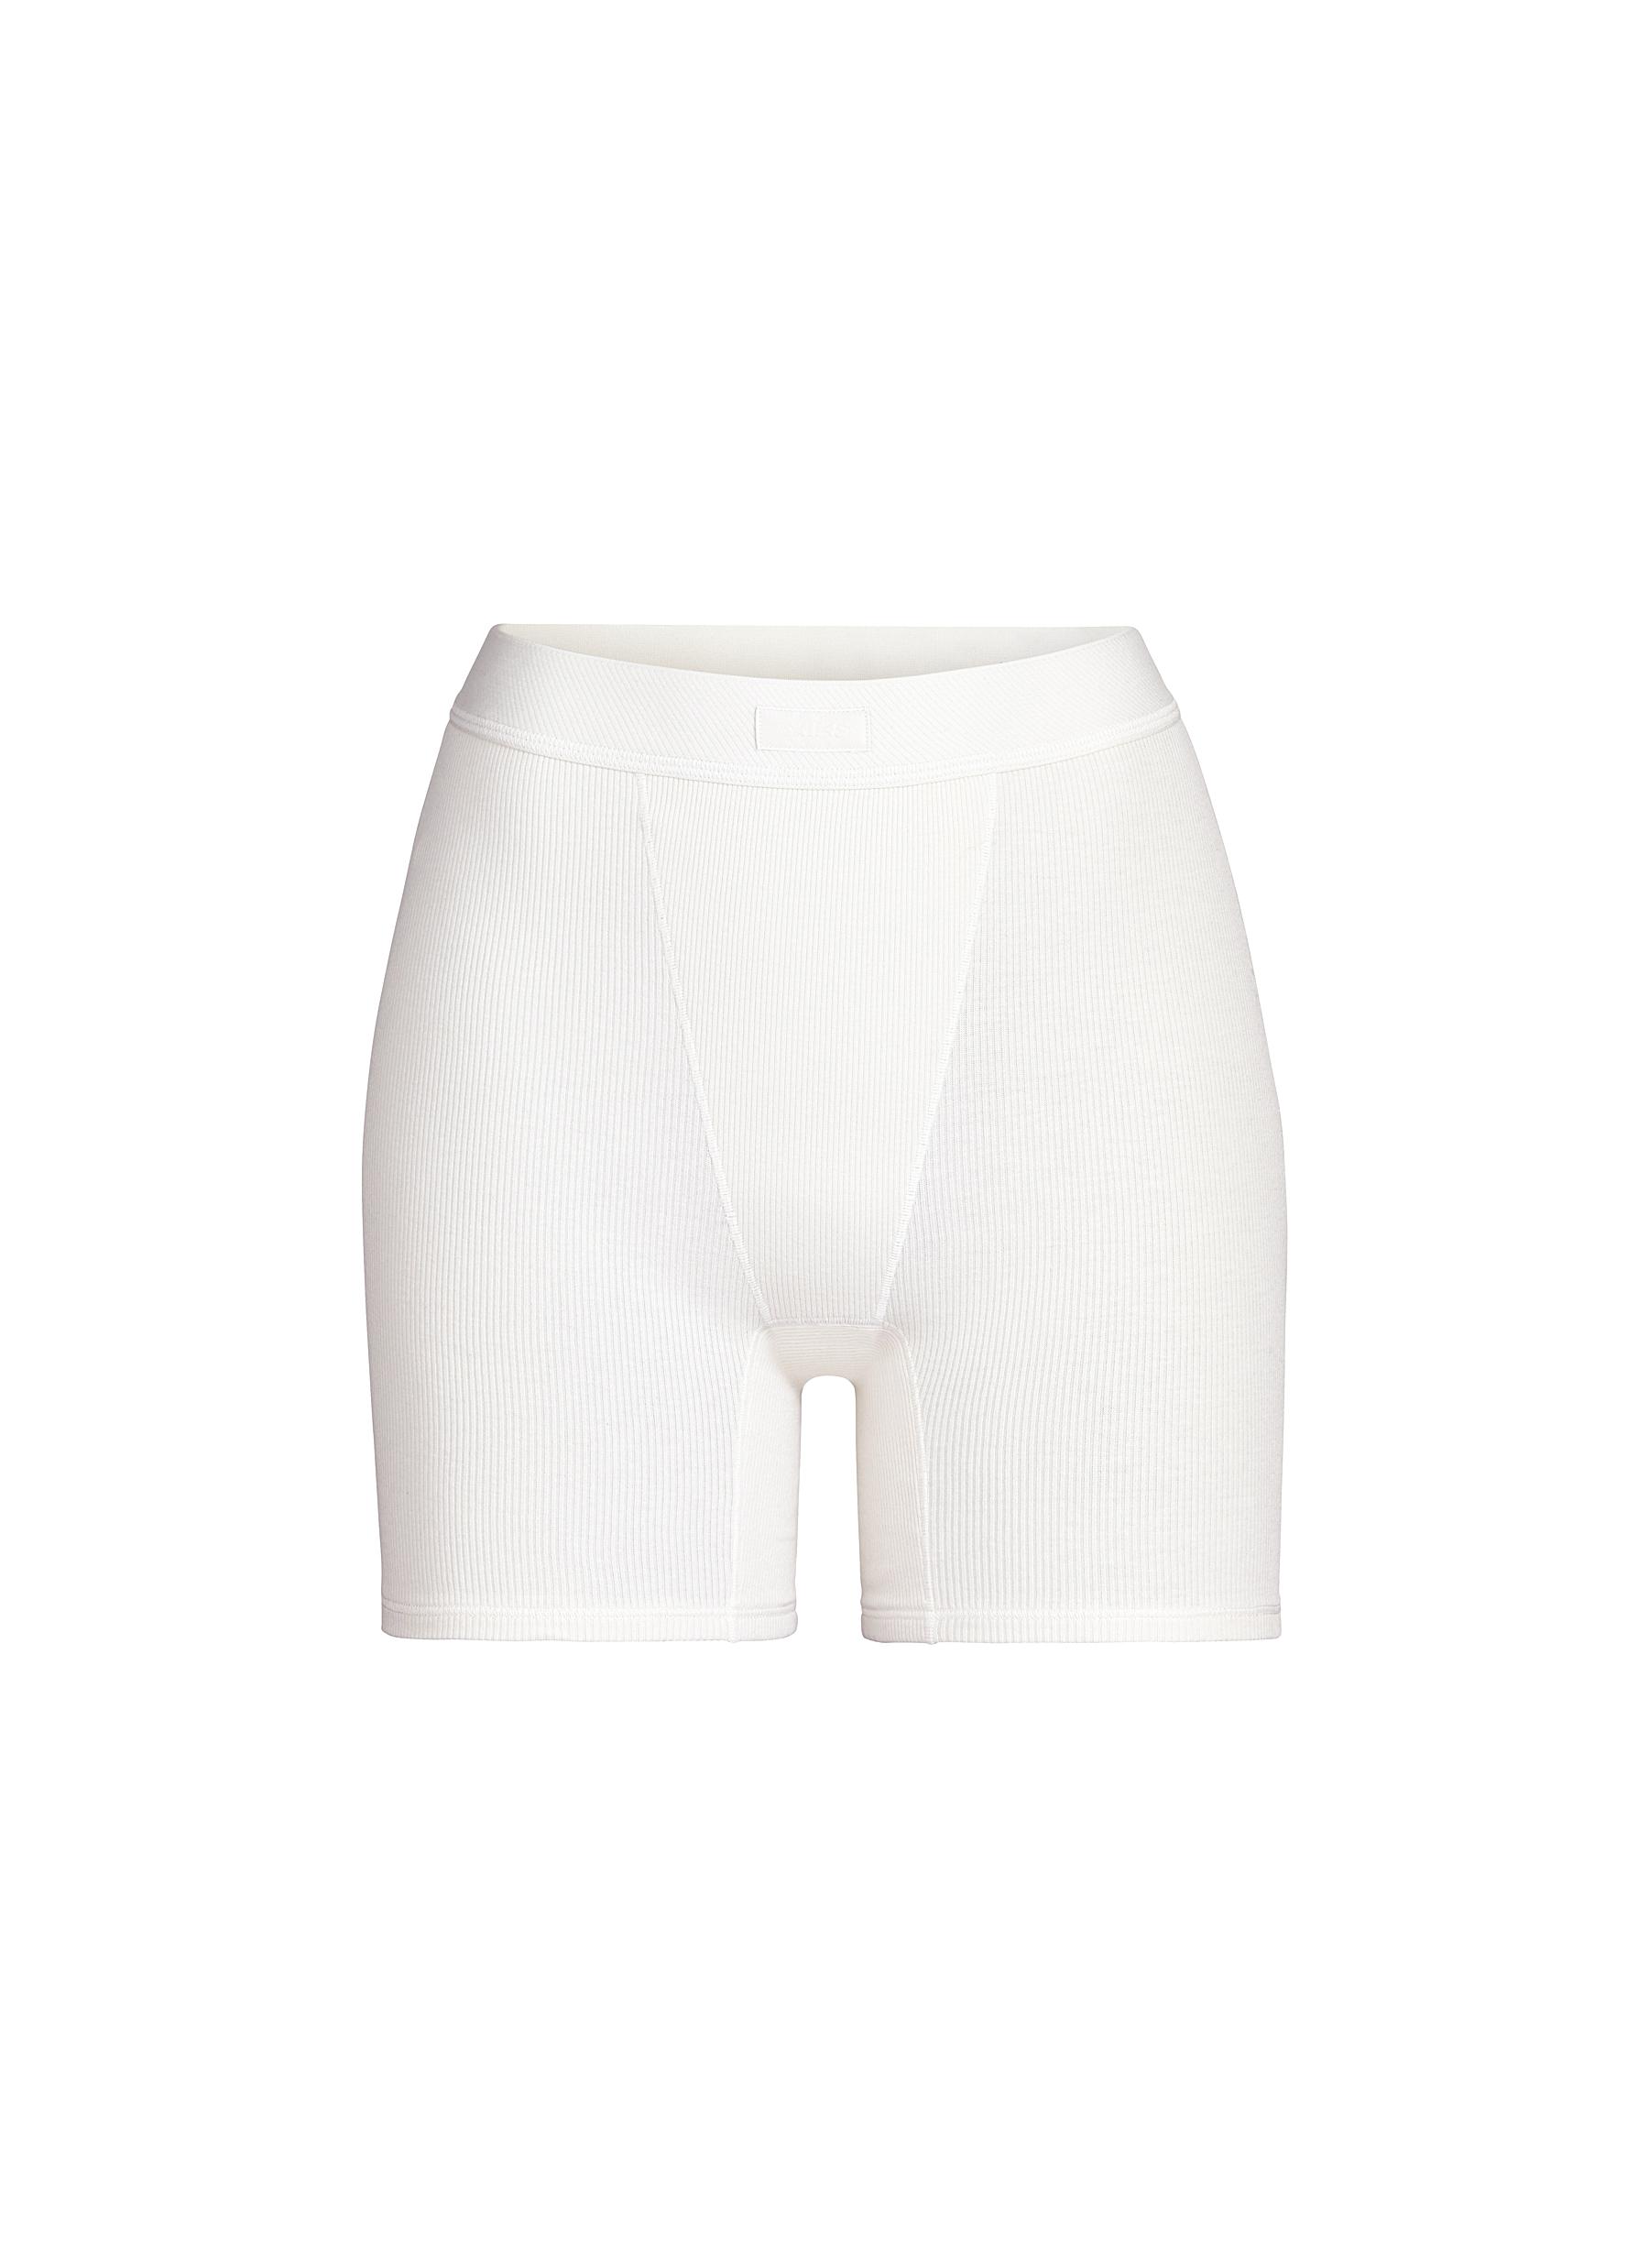  Cotton Boxers For Women